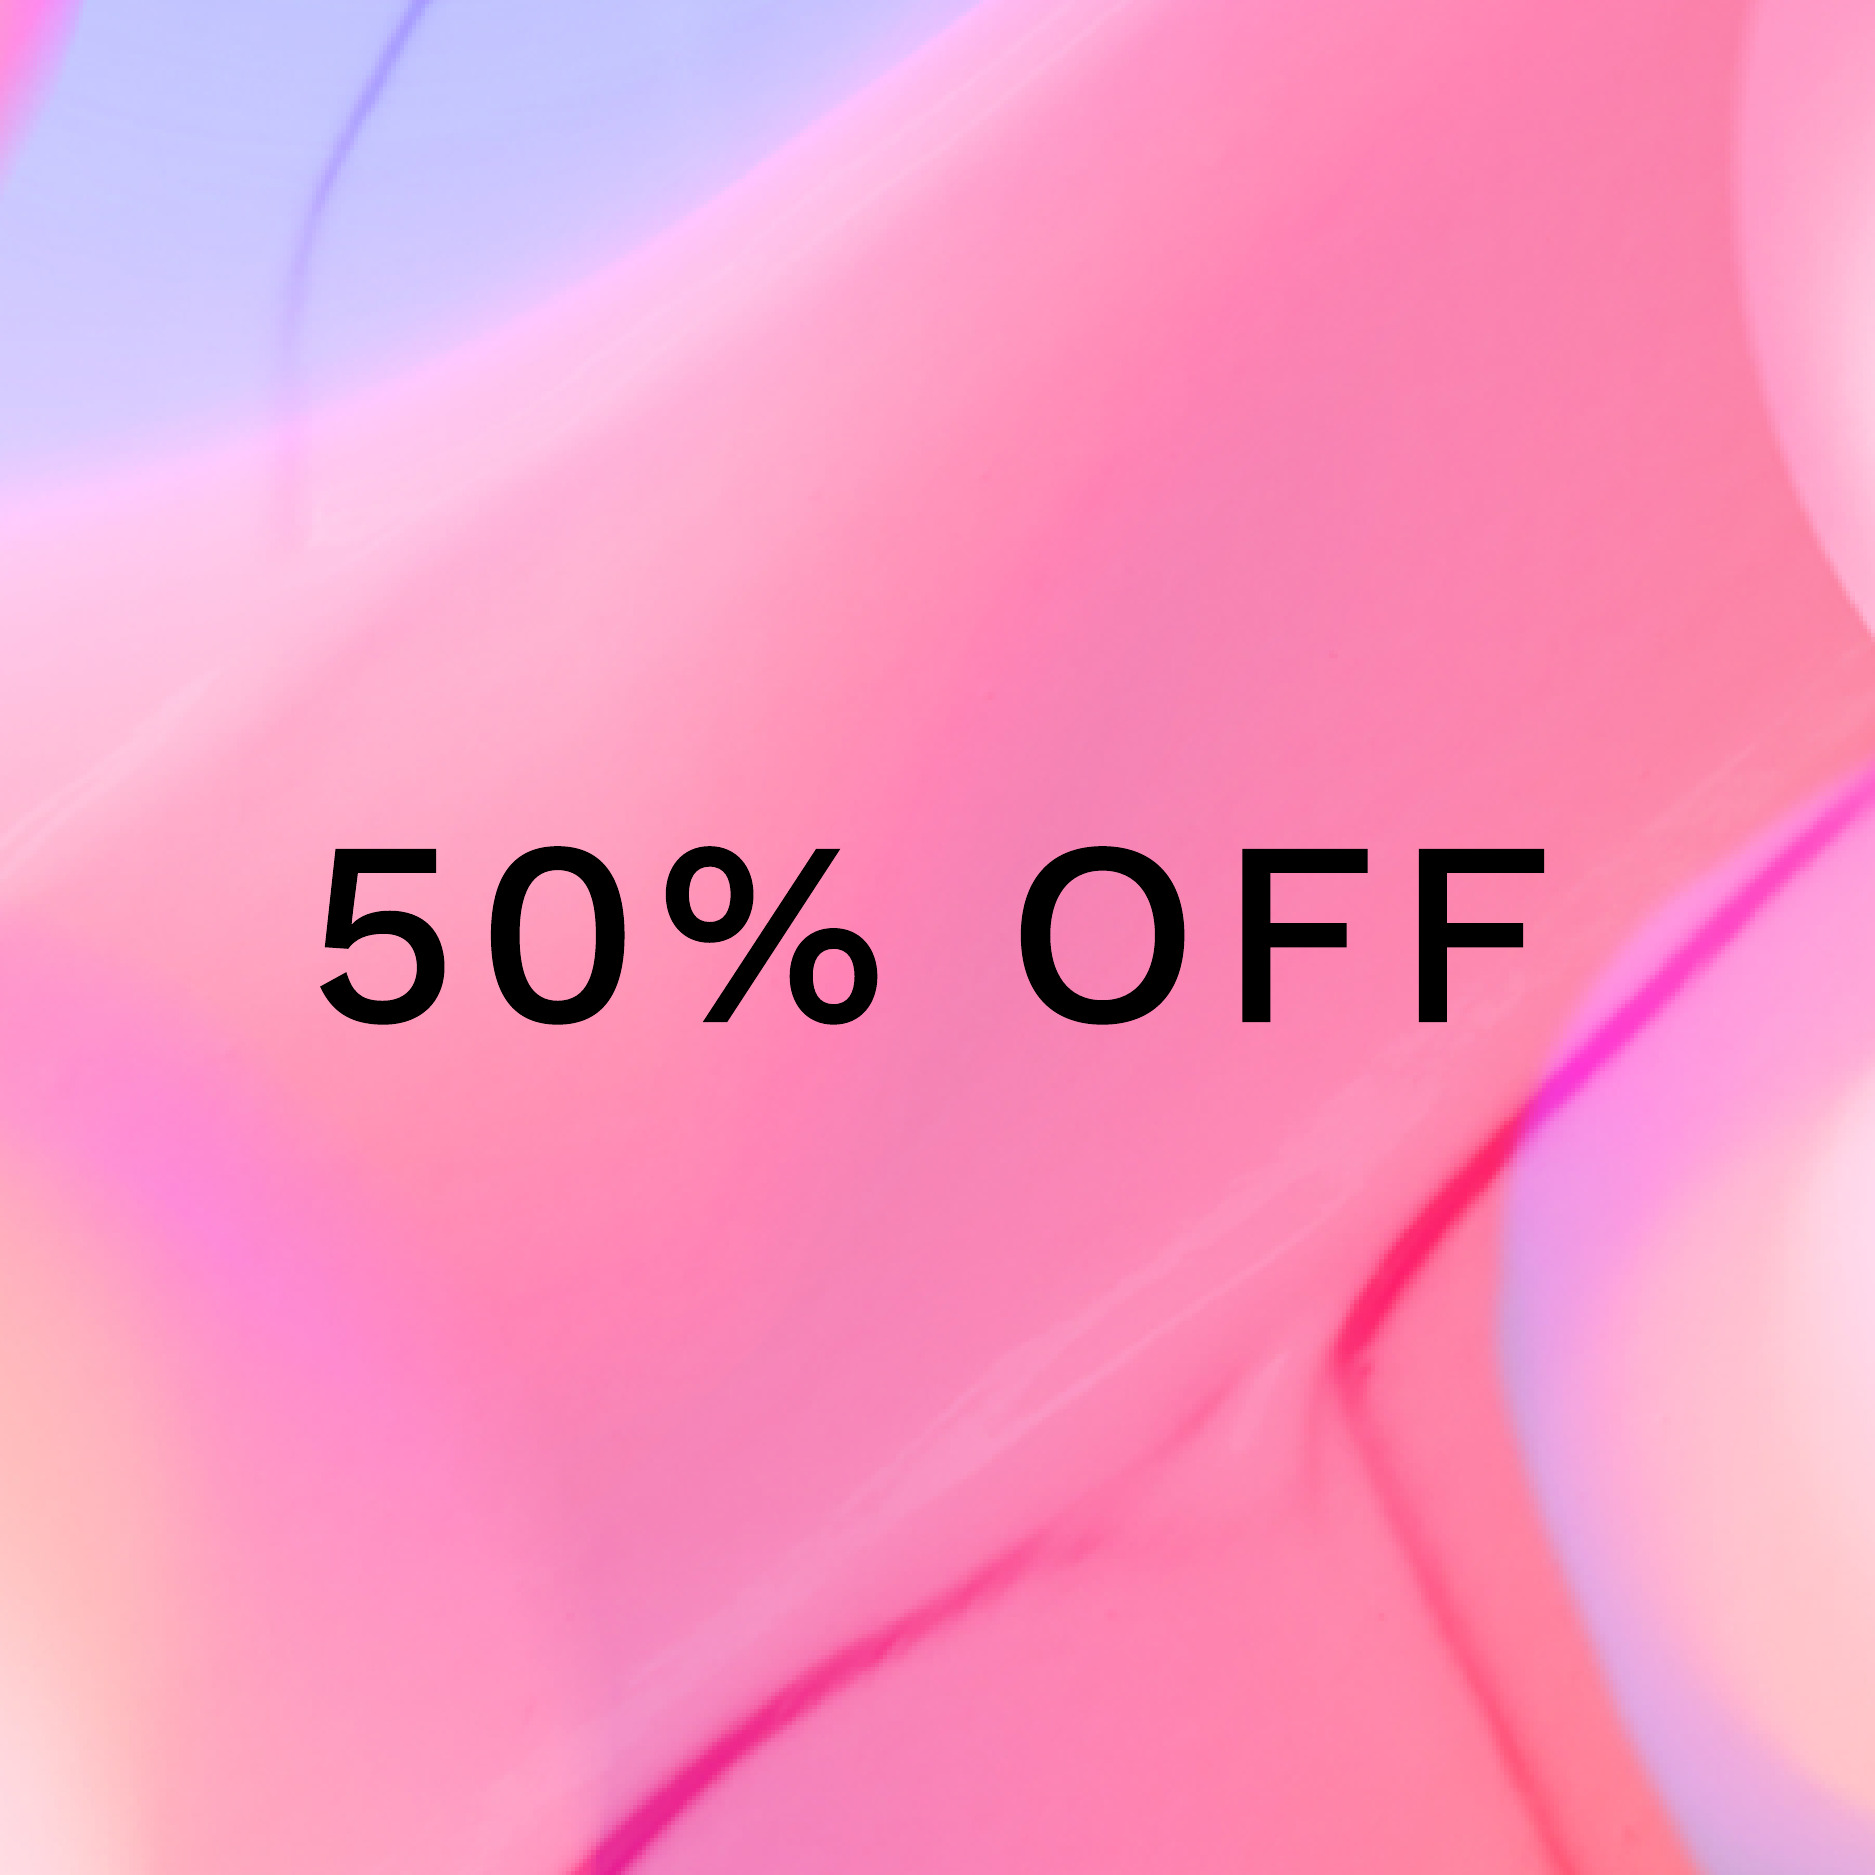 50 percent off products